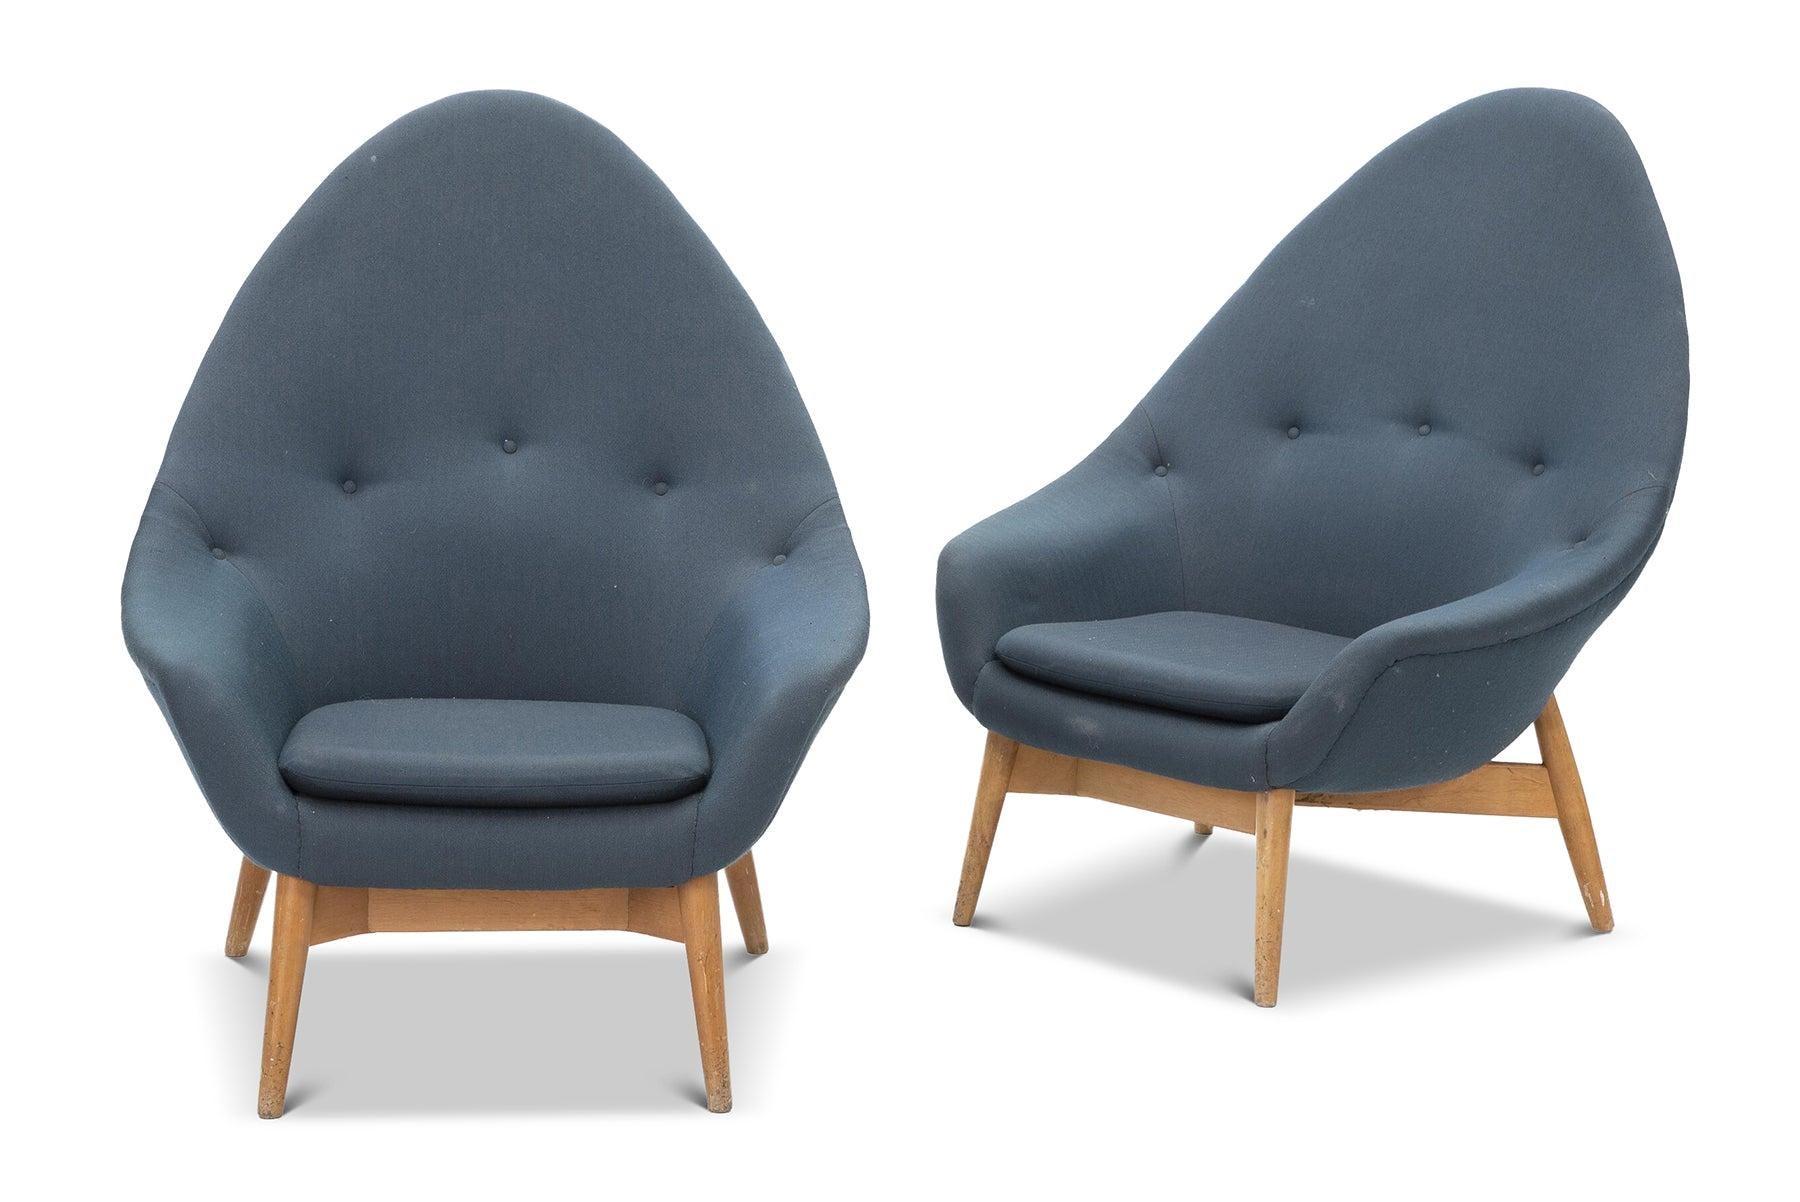 Finnish Pair of Swedish Modern Highback 'Monk' Lounge Chairs by Stockmann Oy